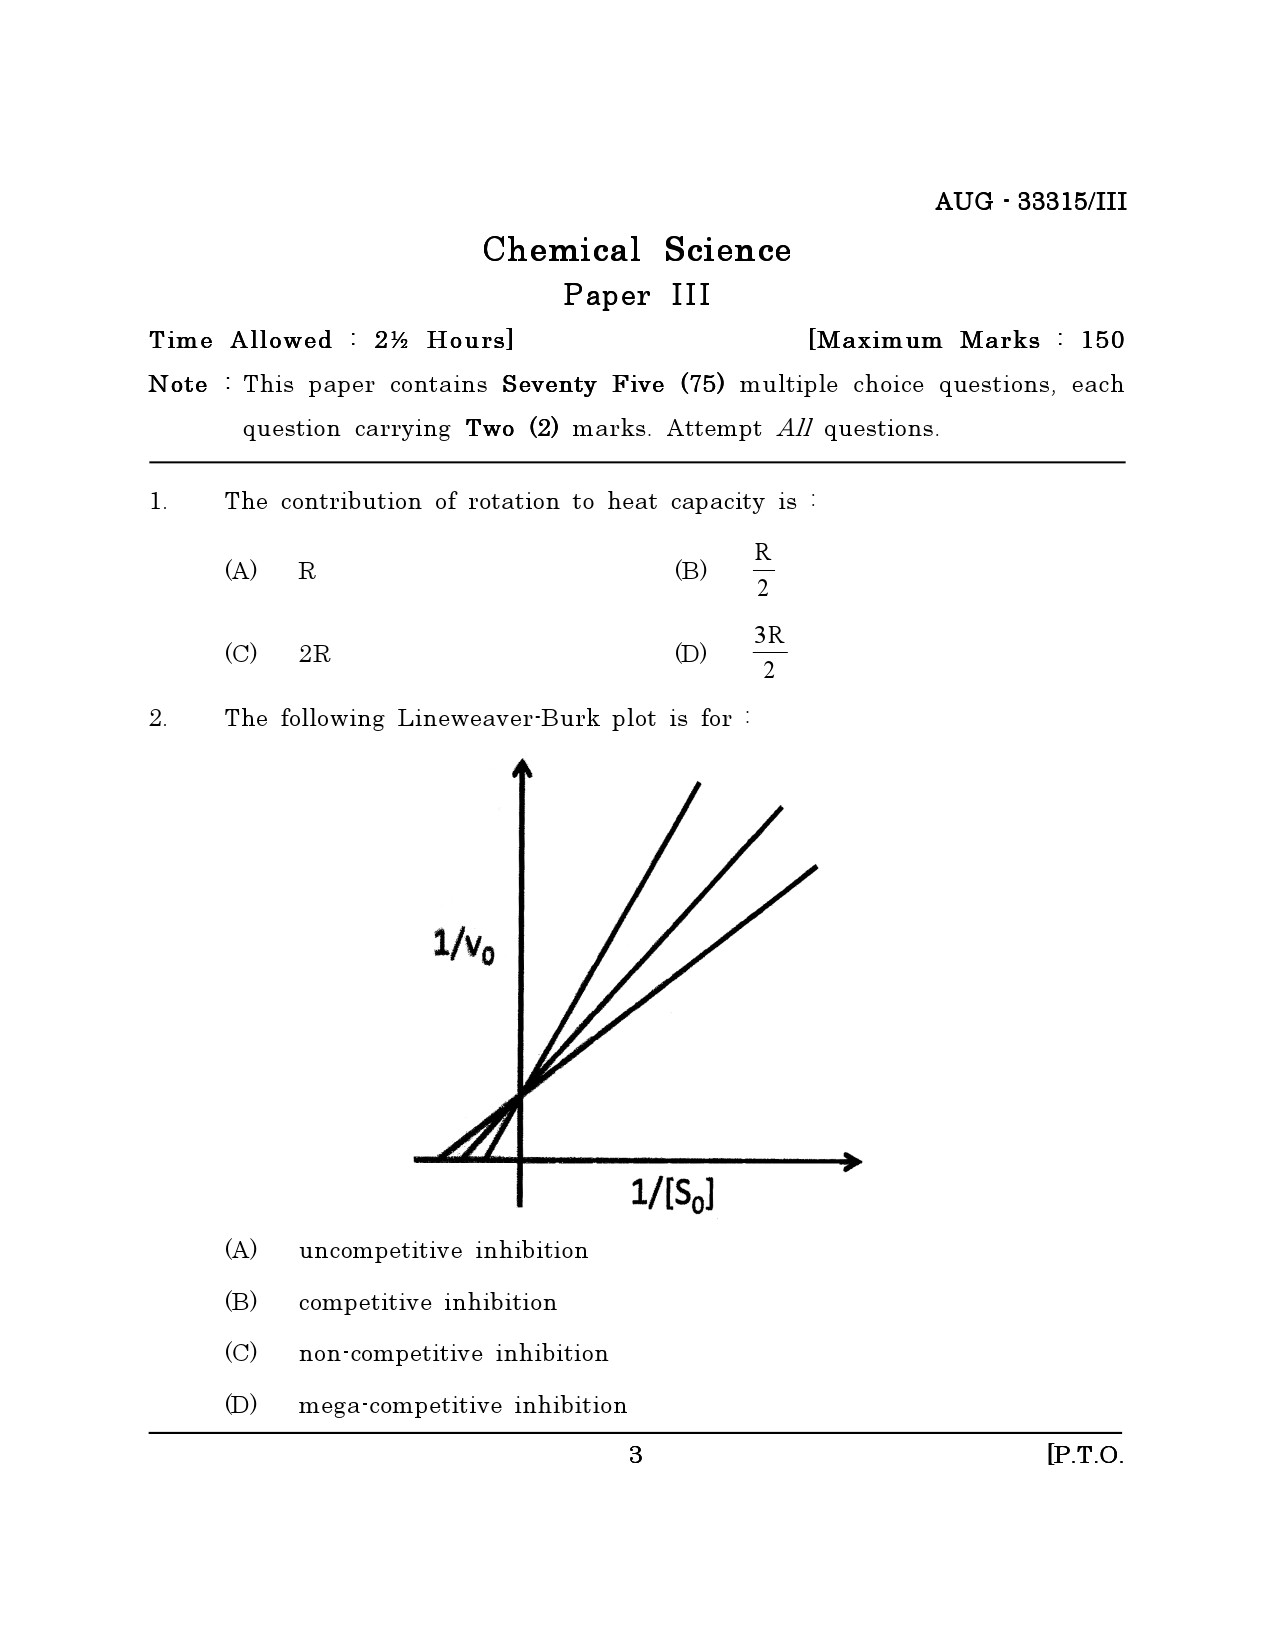 Maharashtra SET Chemical Sciences Question Paper III August 2015 2